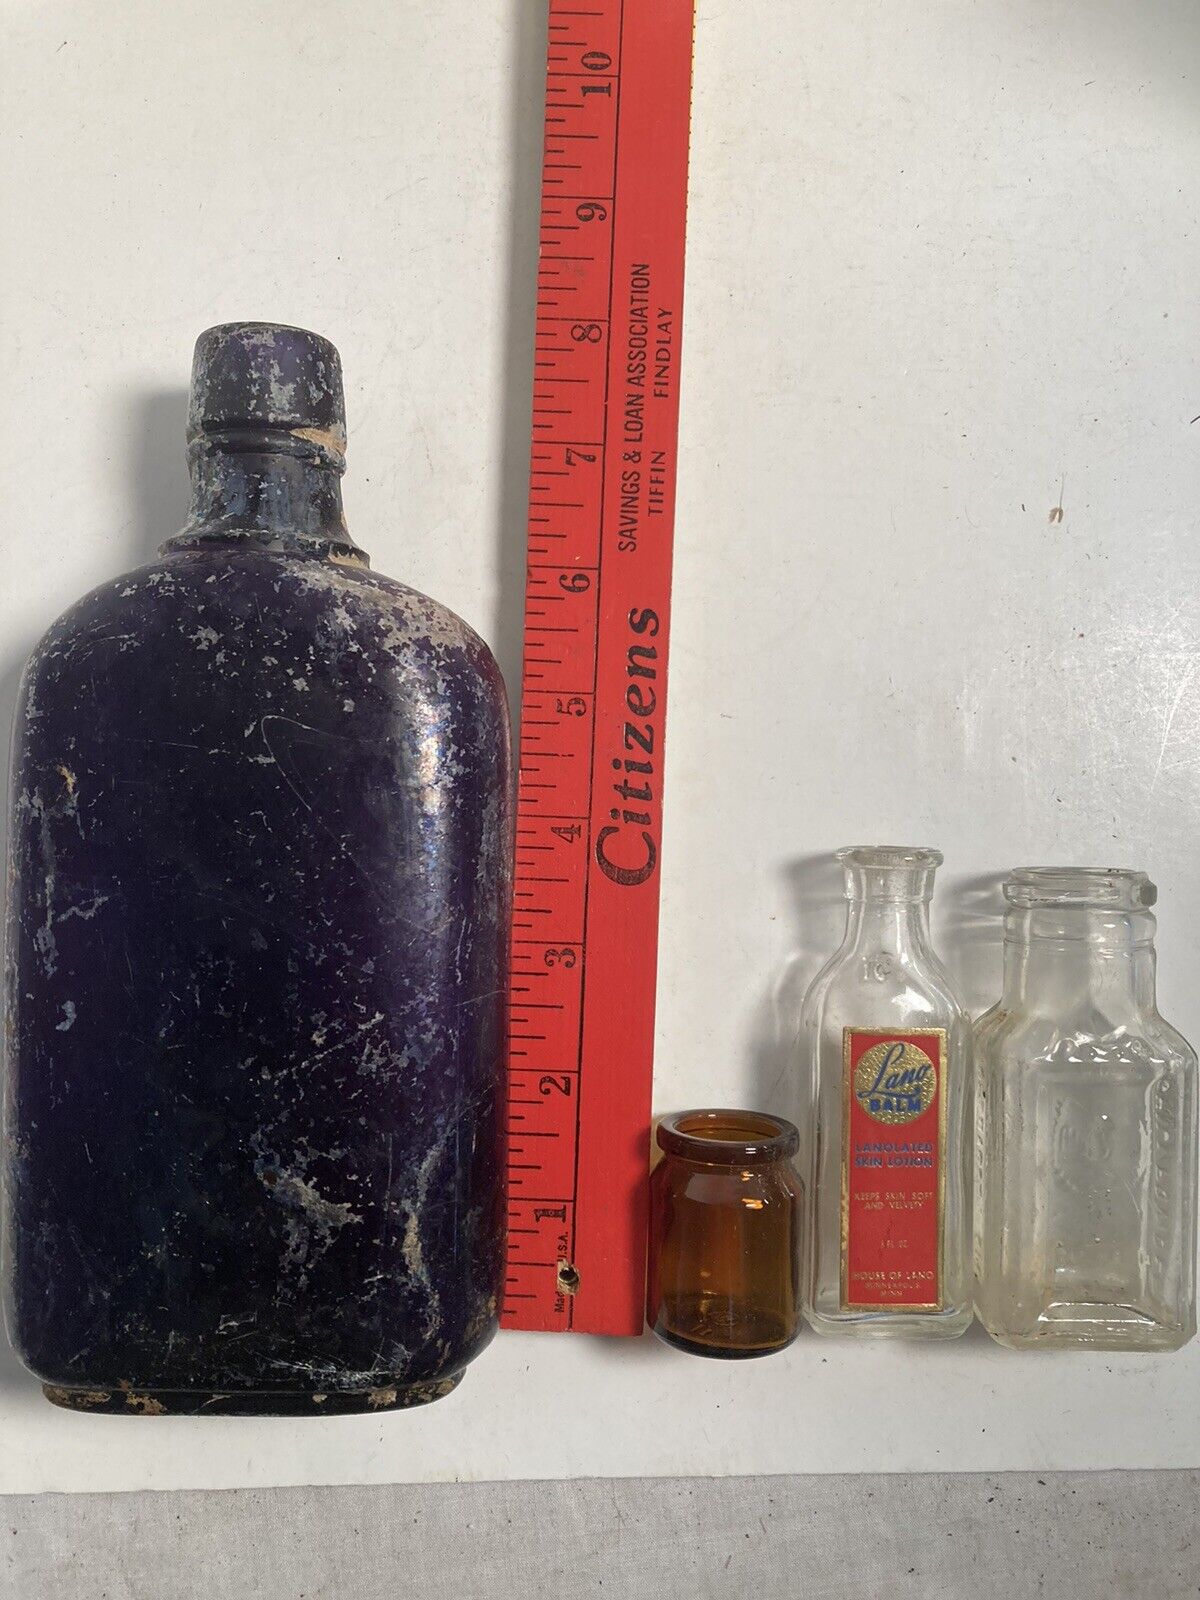 Apothecary, Medicine, Bottles, Industrial, Mercantile Lot of 11, free shipping Без бренда - фотография #2